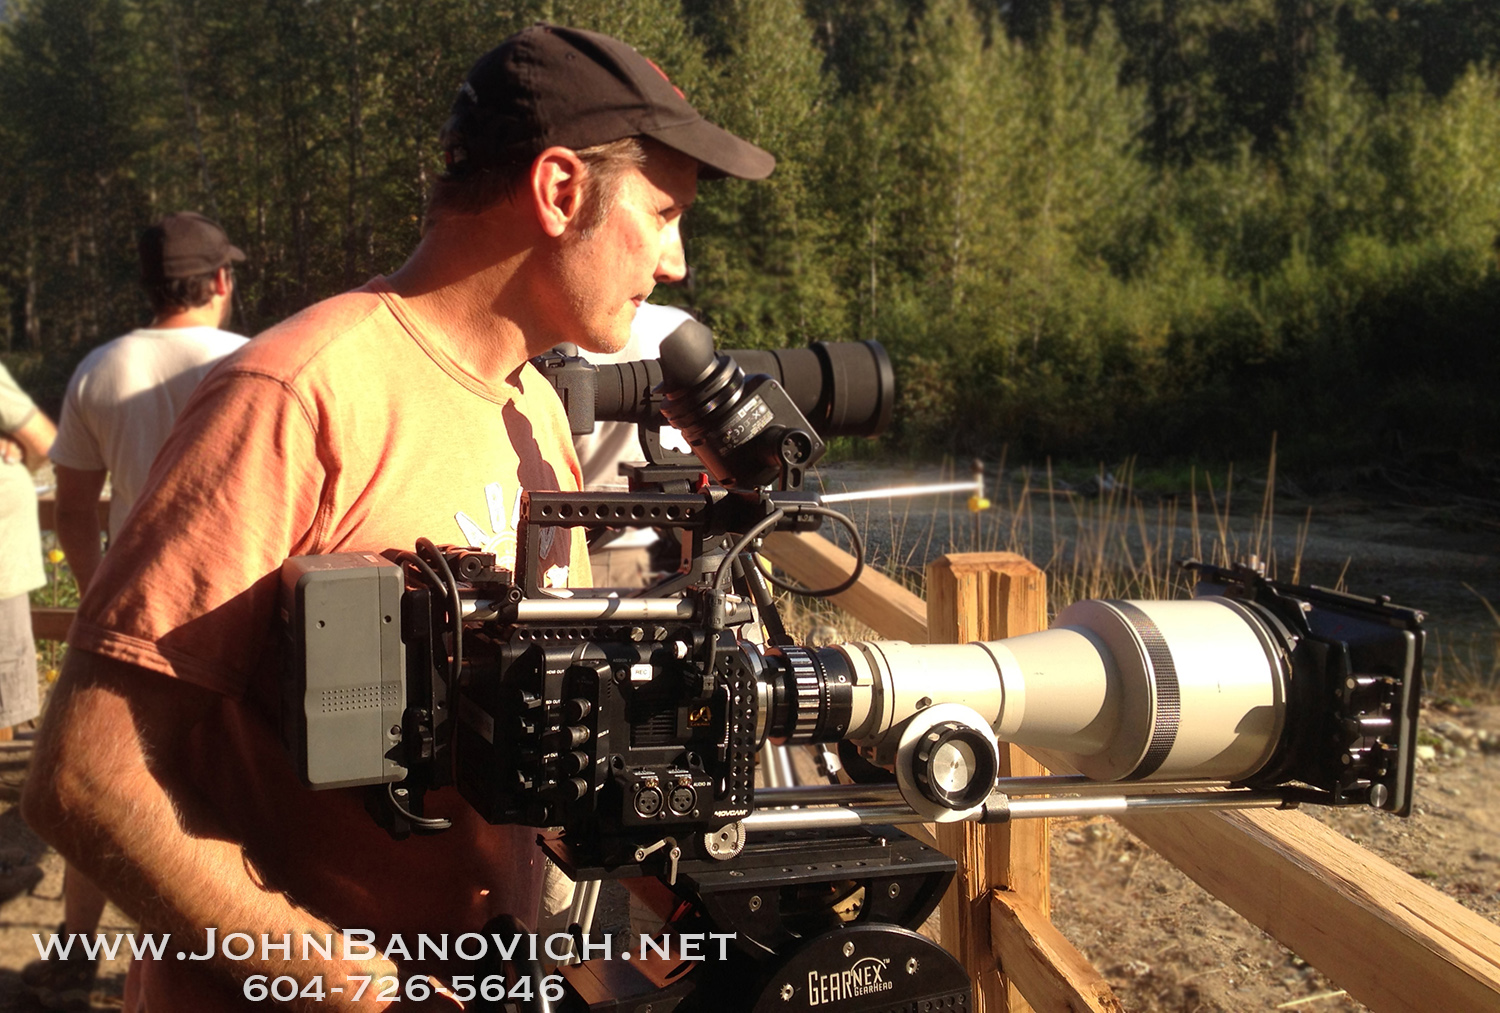 Self Shooting Producer/Director with small crew on wildlife documentary with my F55 and custom 600m on top of my gear head.